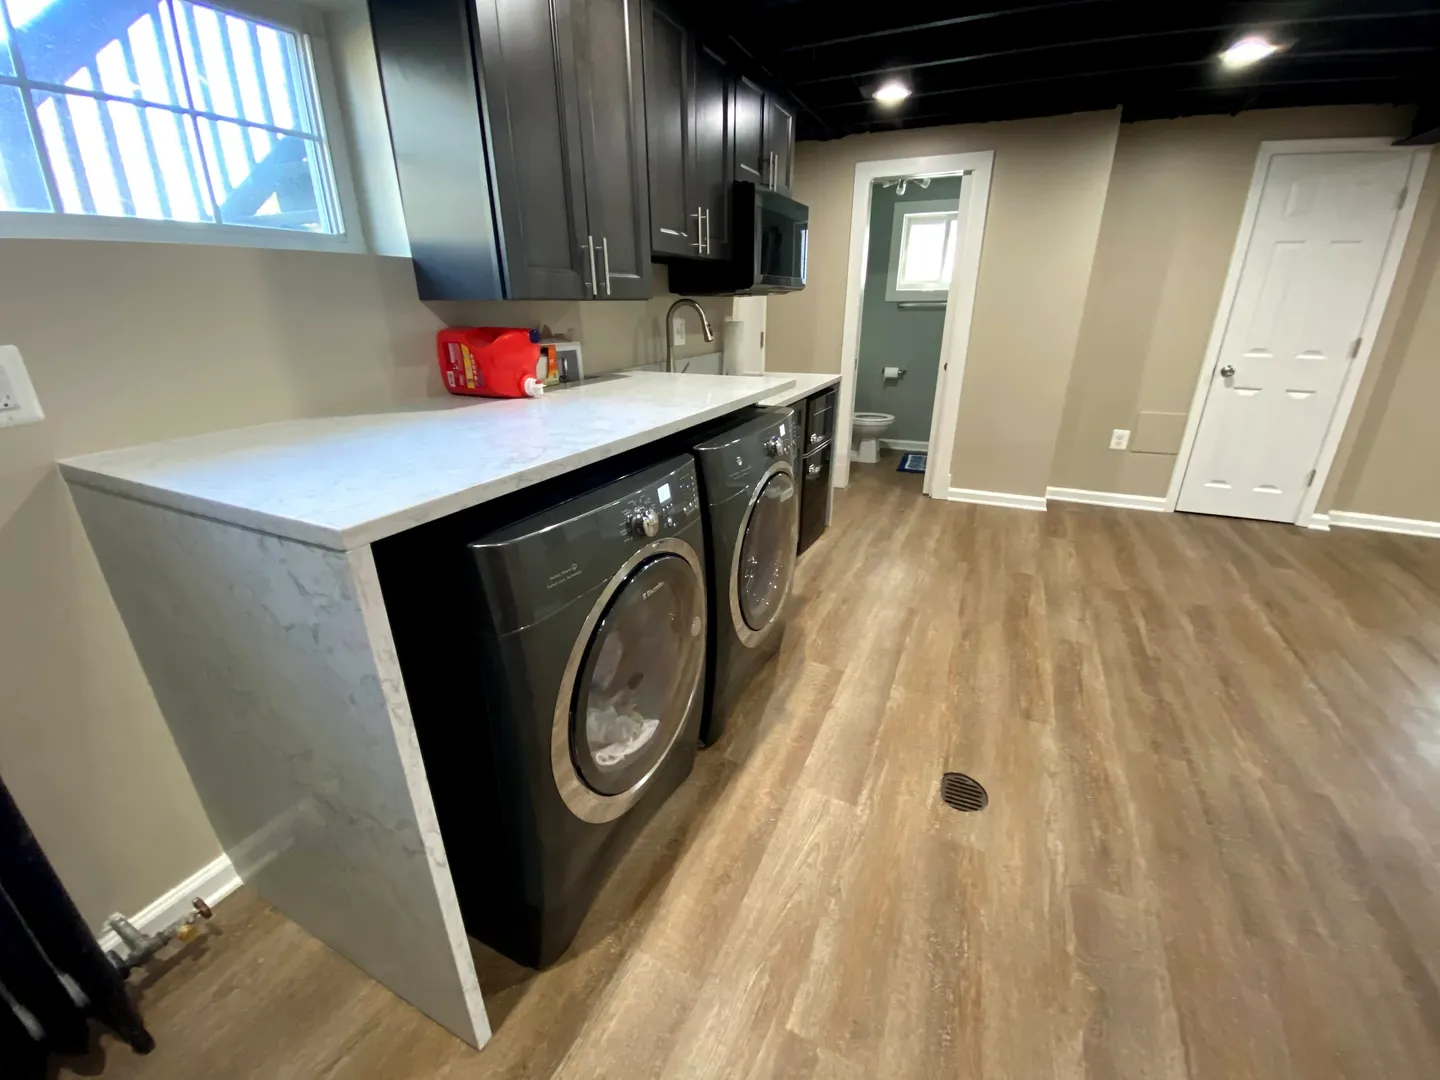 A room with two black and white appliances